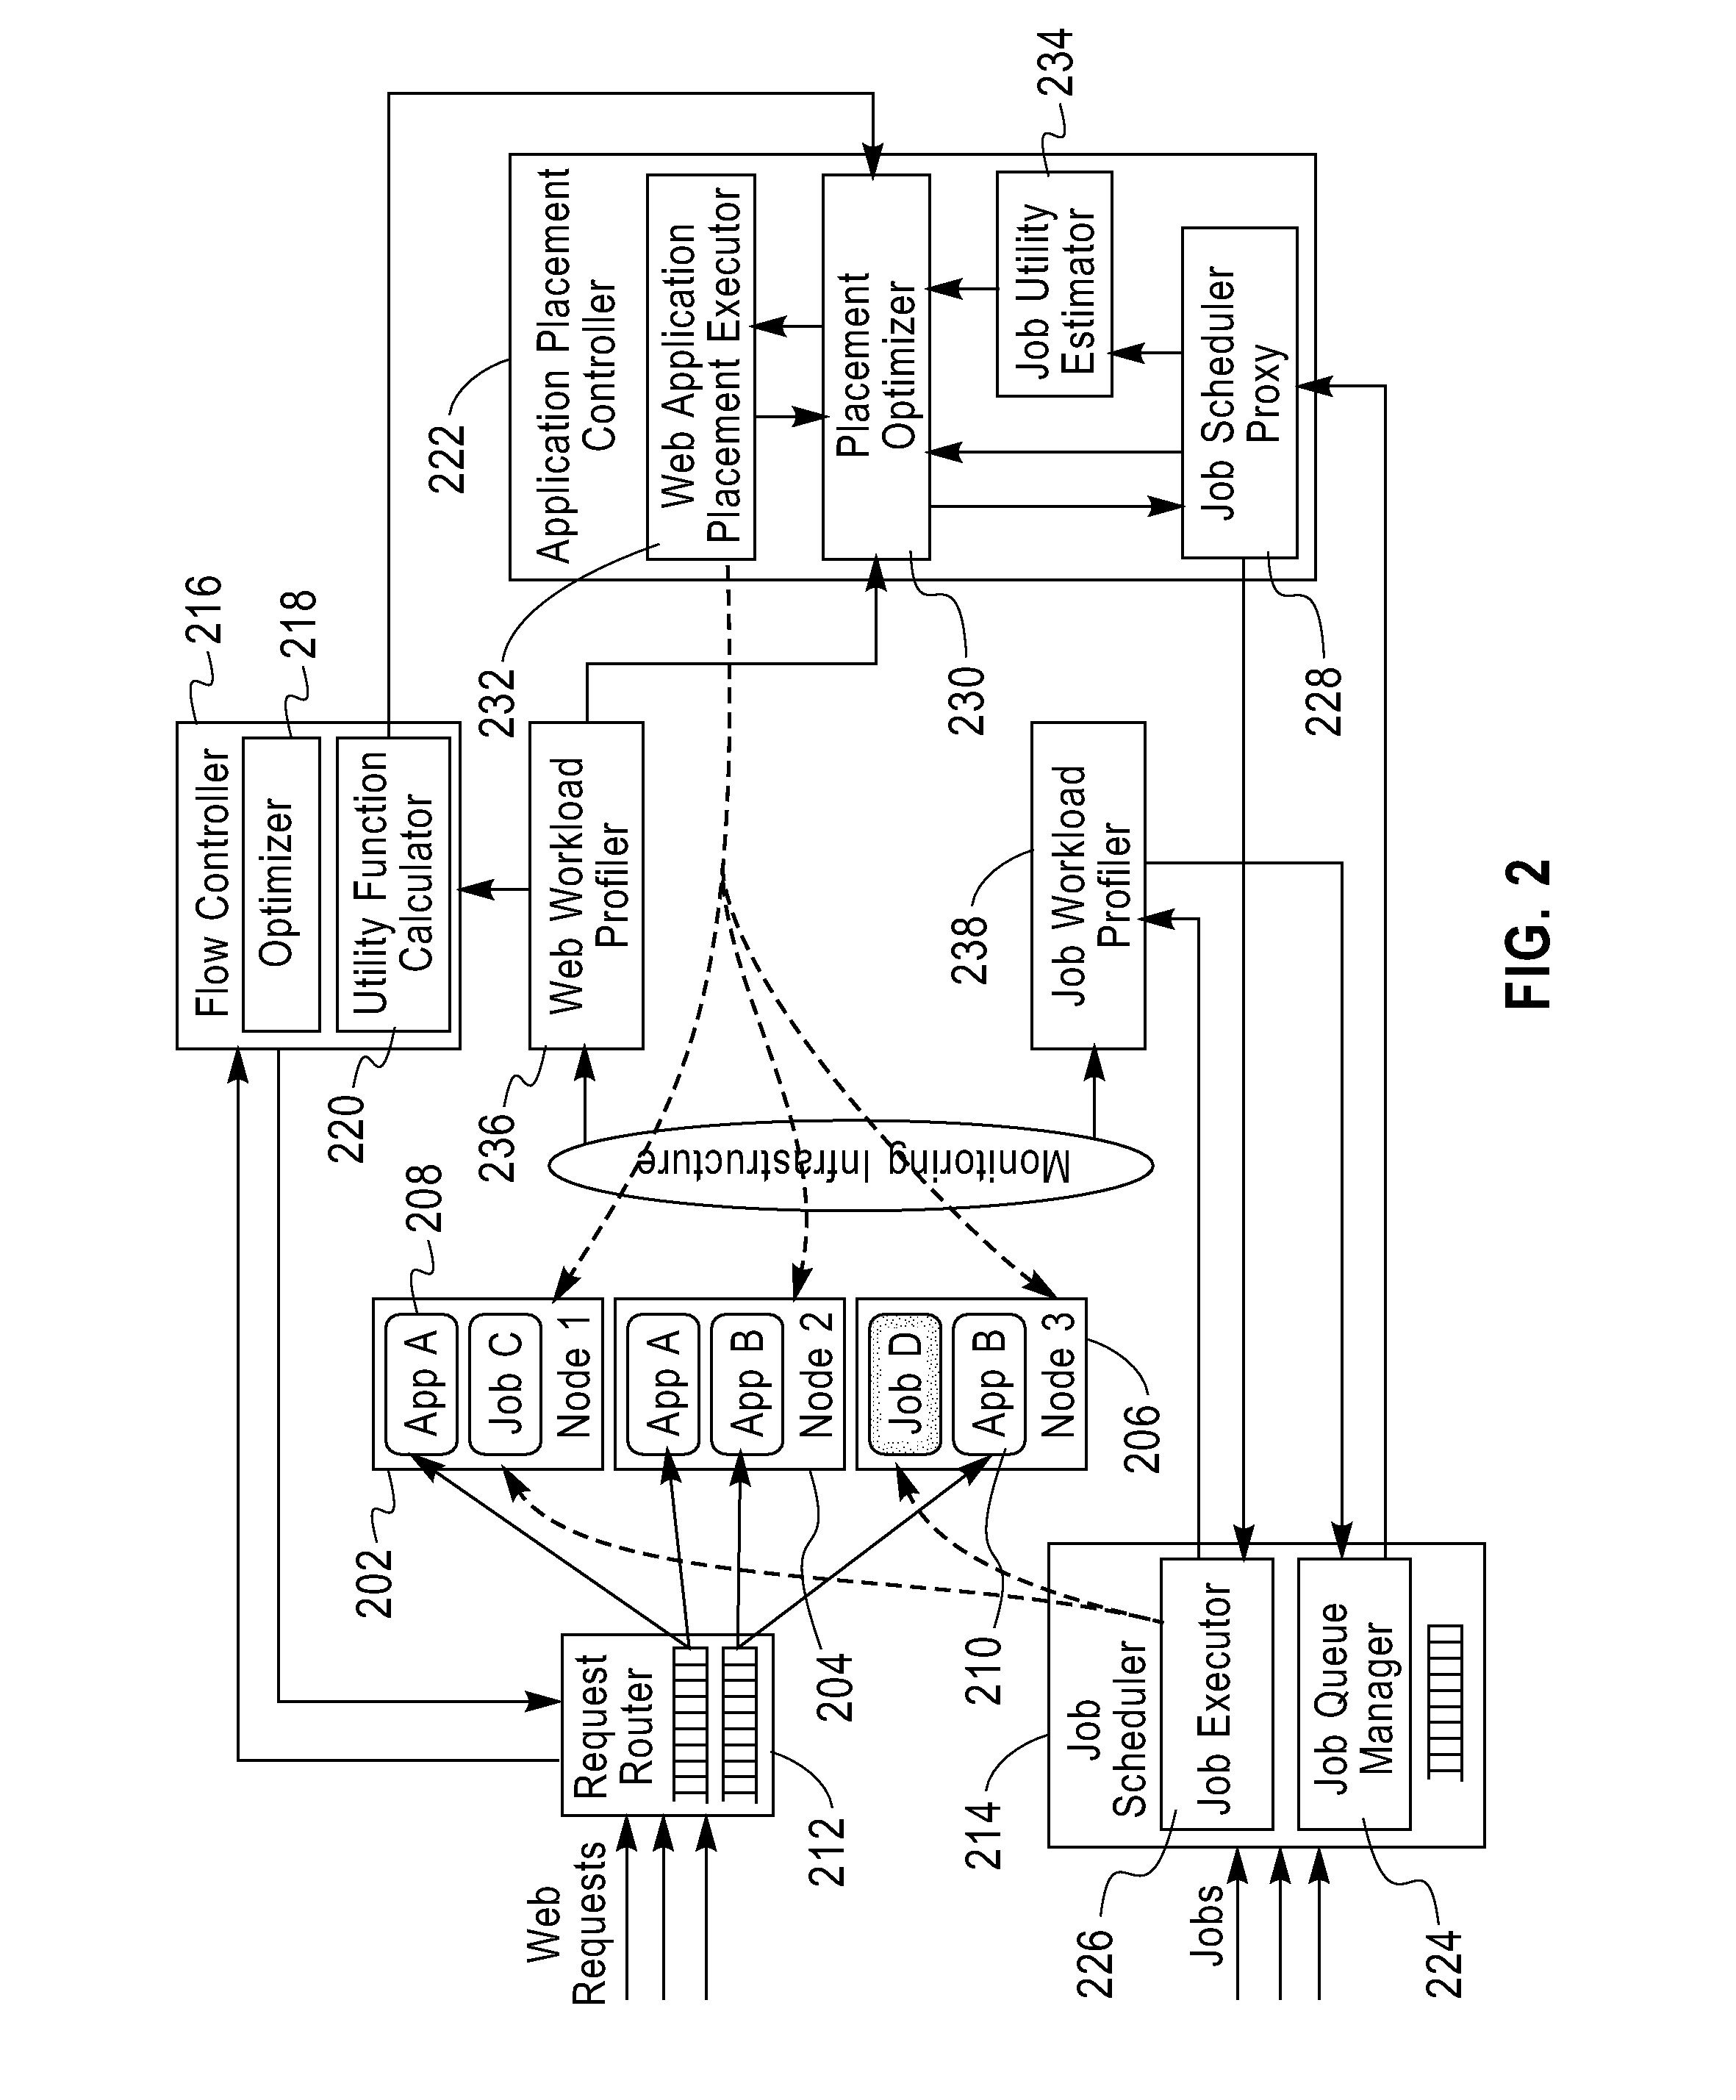 Methods and apparatus for management of heterogeneous workloads